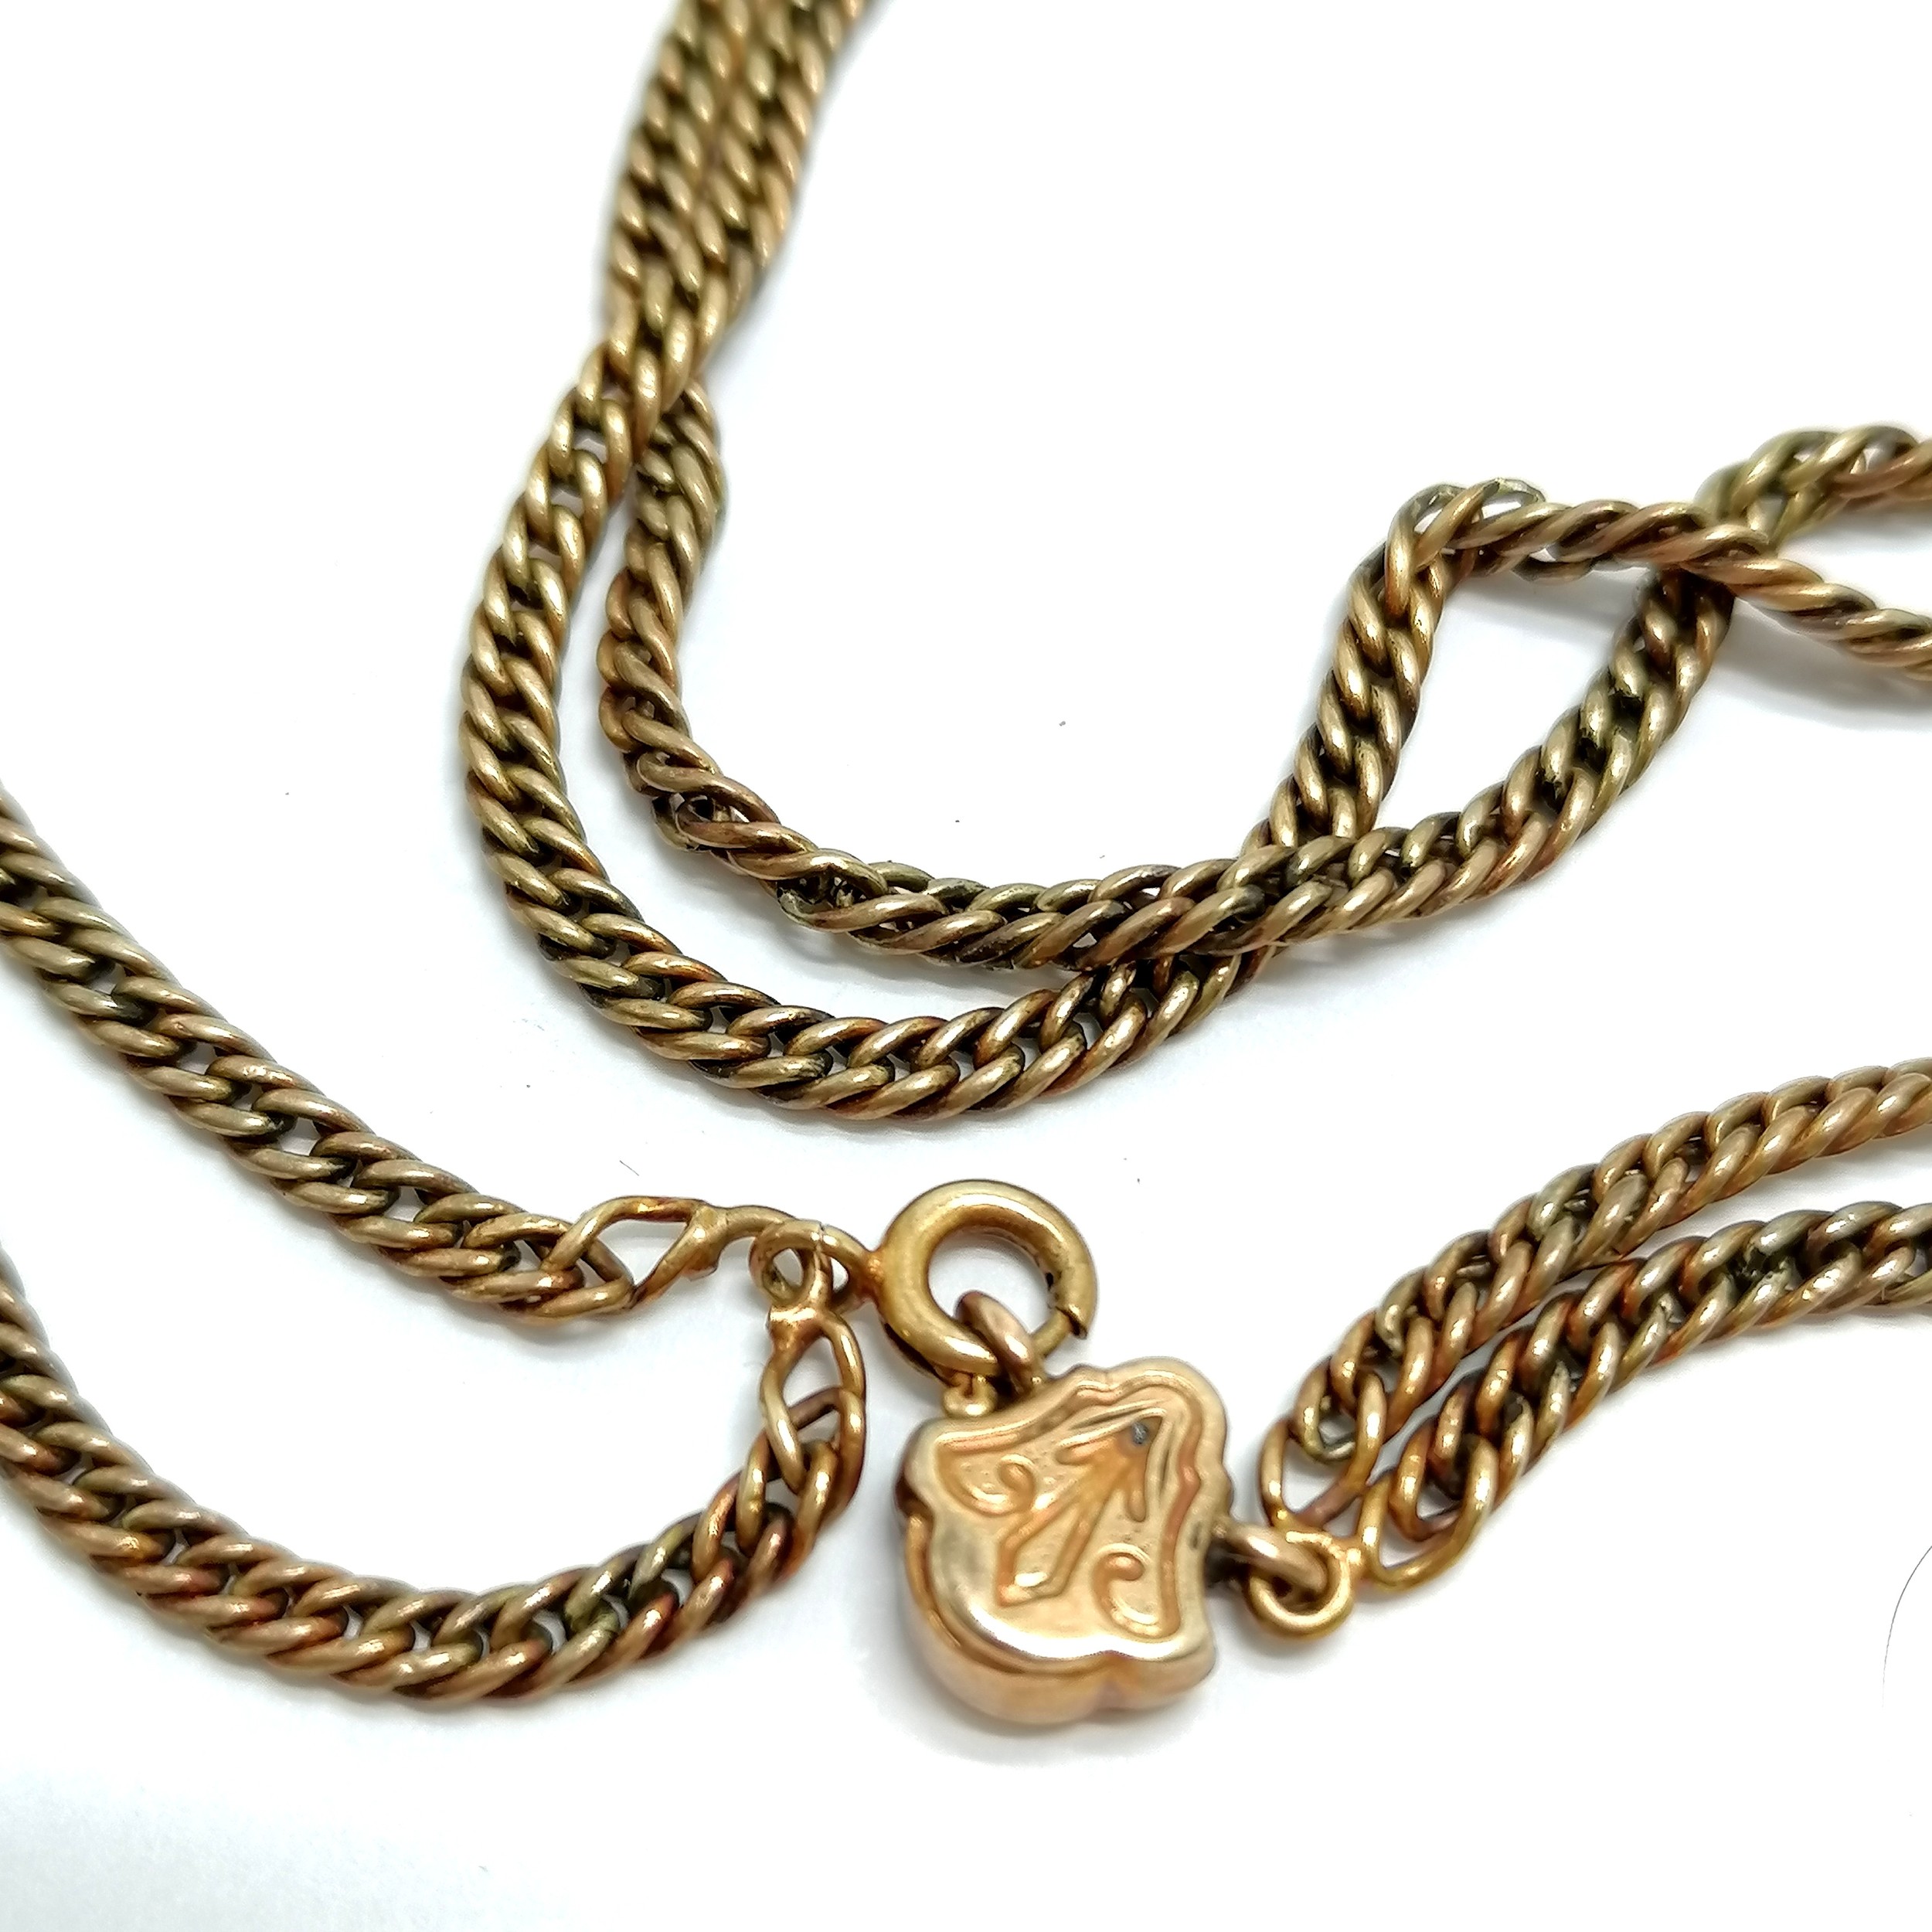 Antique unmarked (touch tests as 14ct) gold double neckchain (constructed from antique albertine